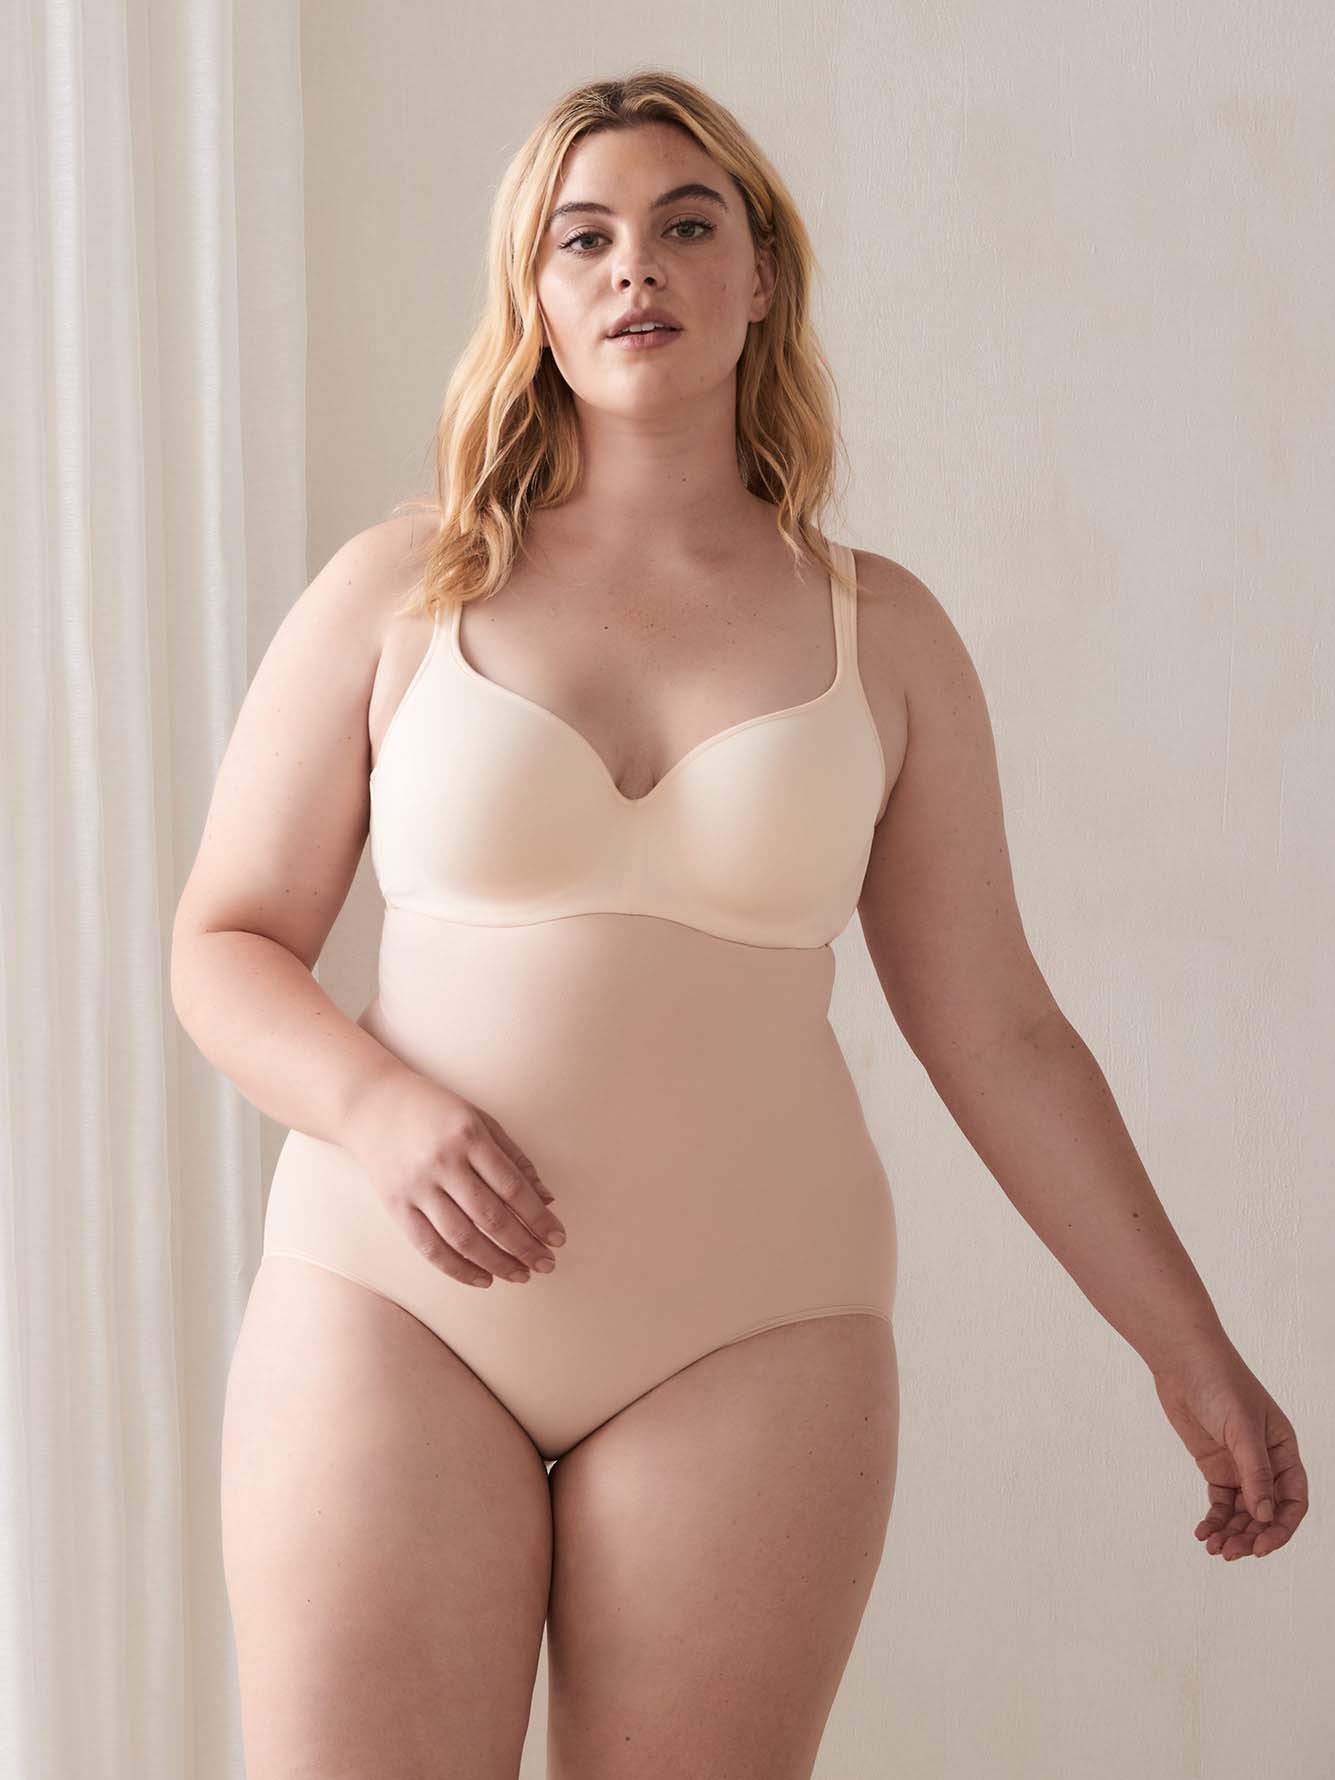 Spanx Shapewear For Women Tummy Control High-waisted Power Panties (regular  And Plus Size)